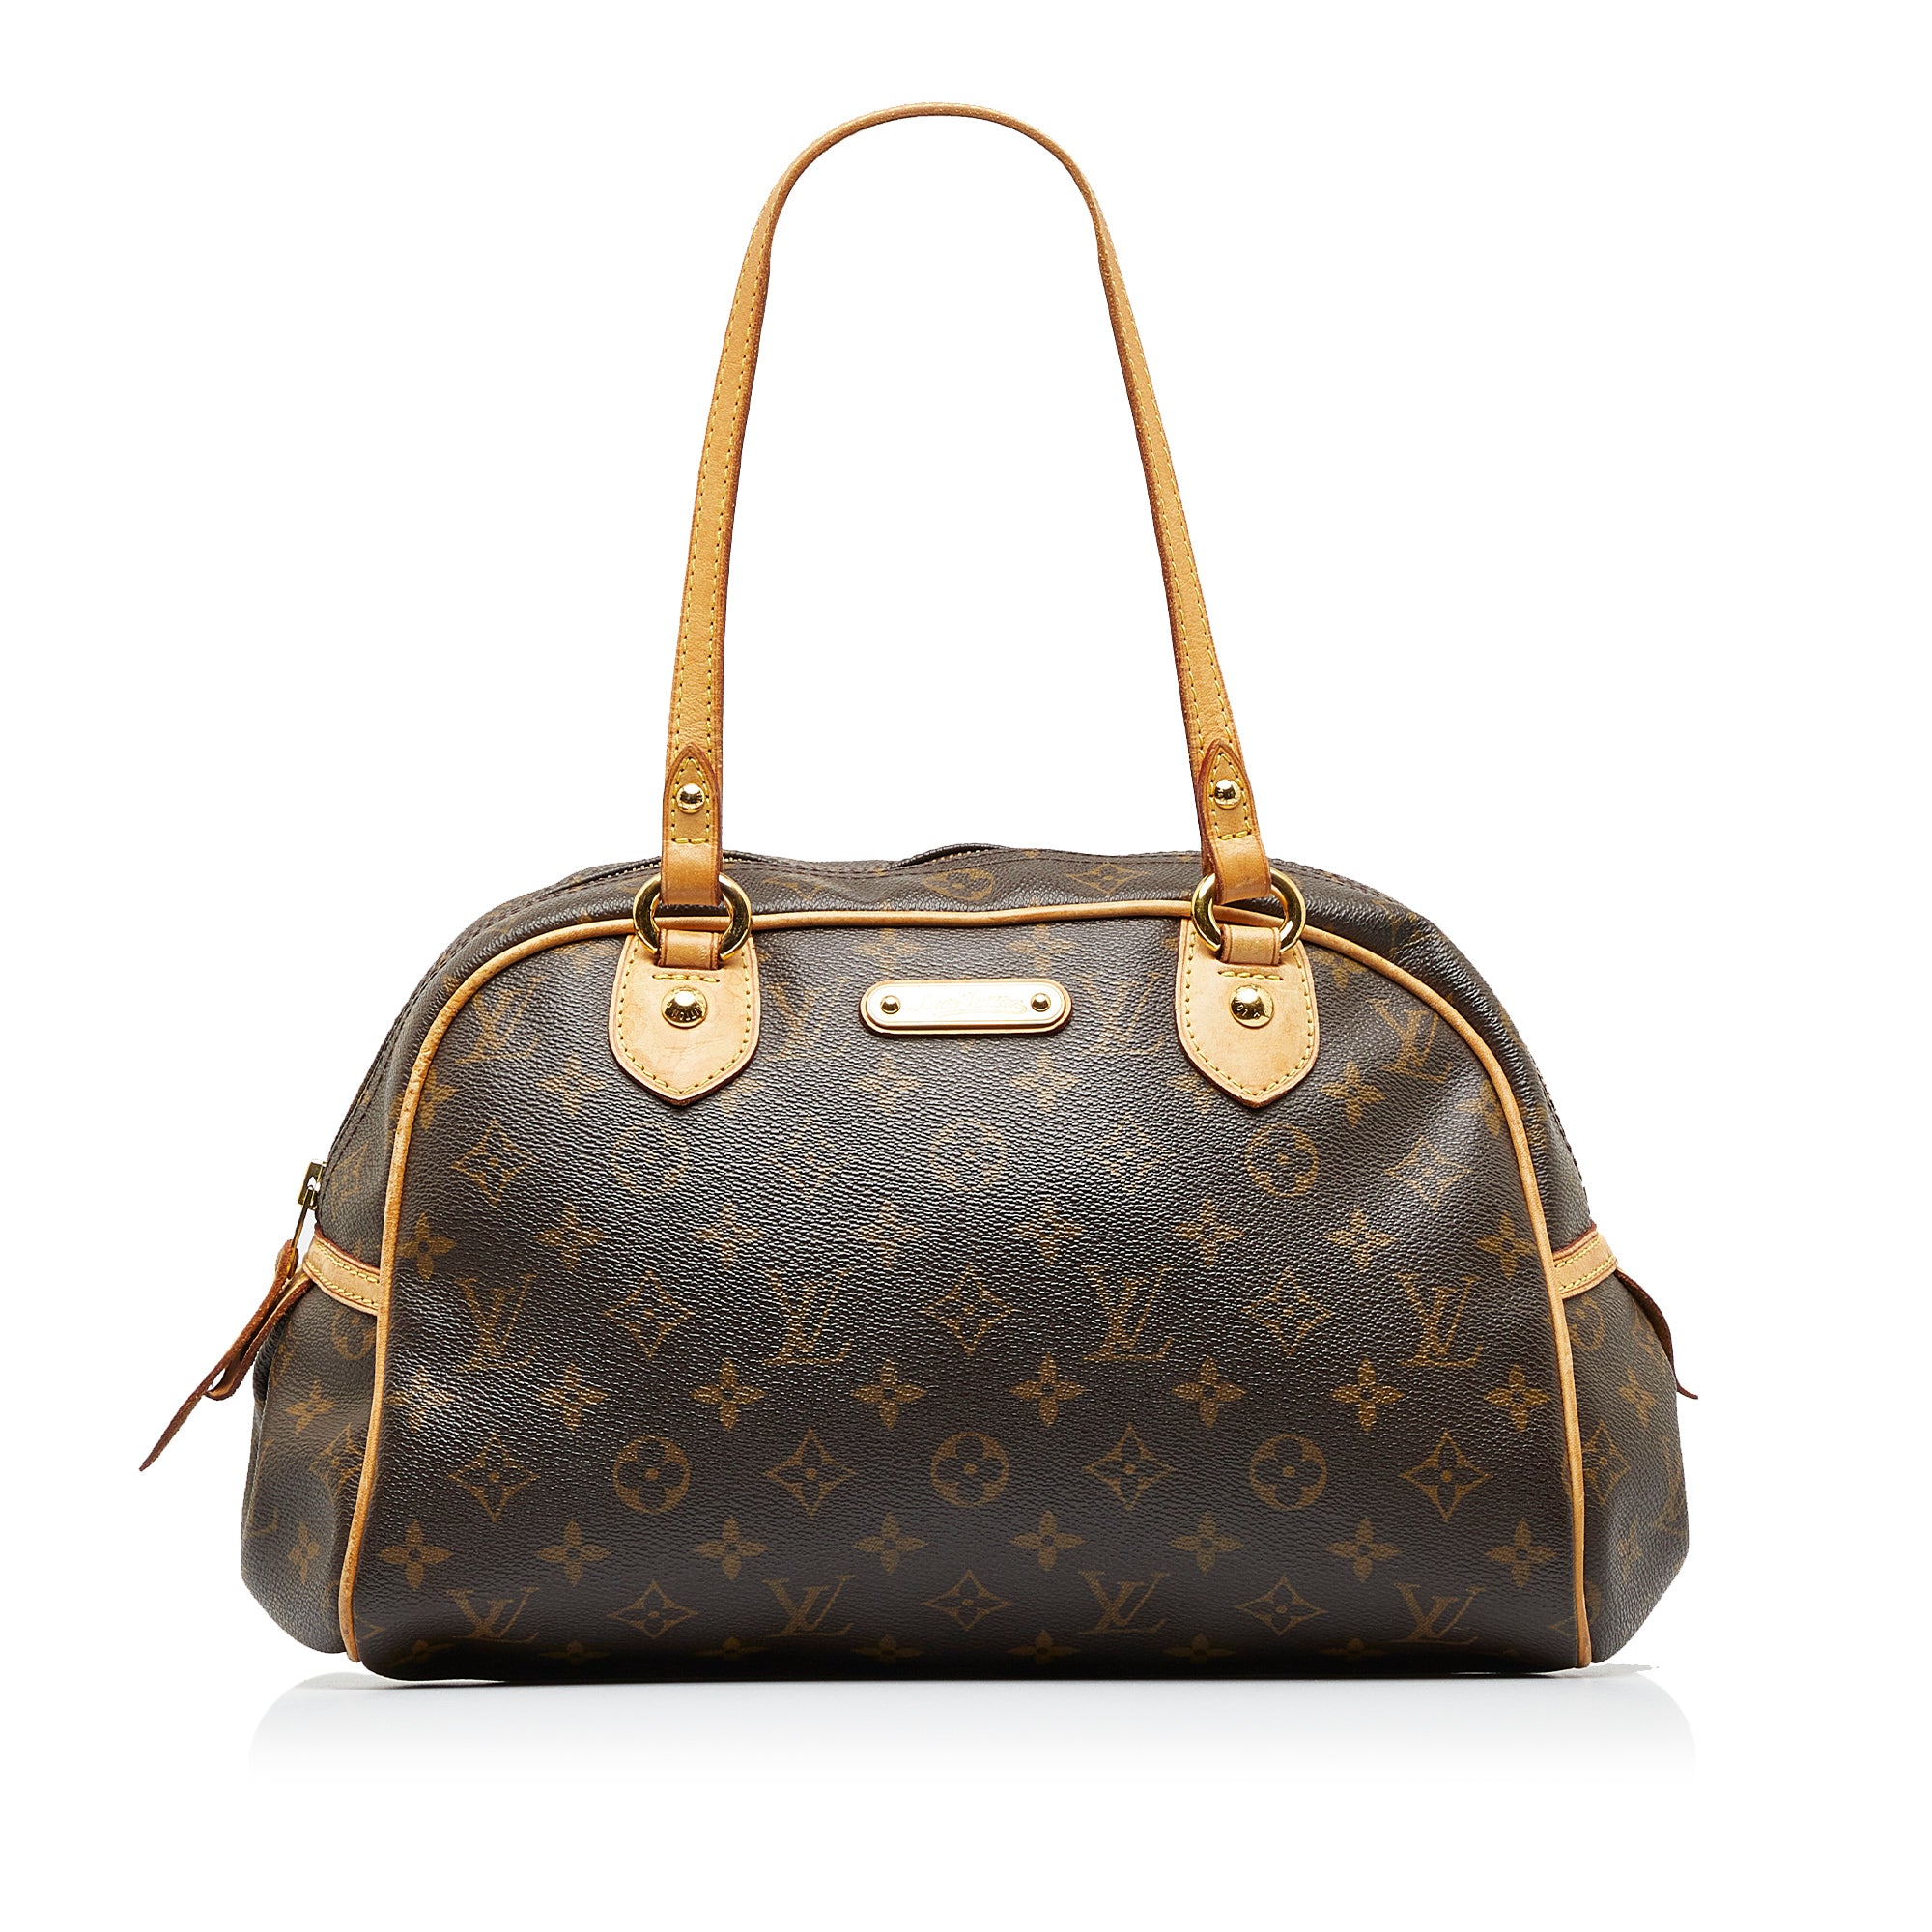 Louis Vuitton - Authenticated Galliera Handbag - Synthetic Brown for Women, Very Good Condition